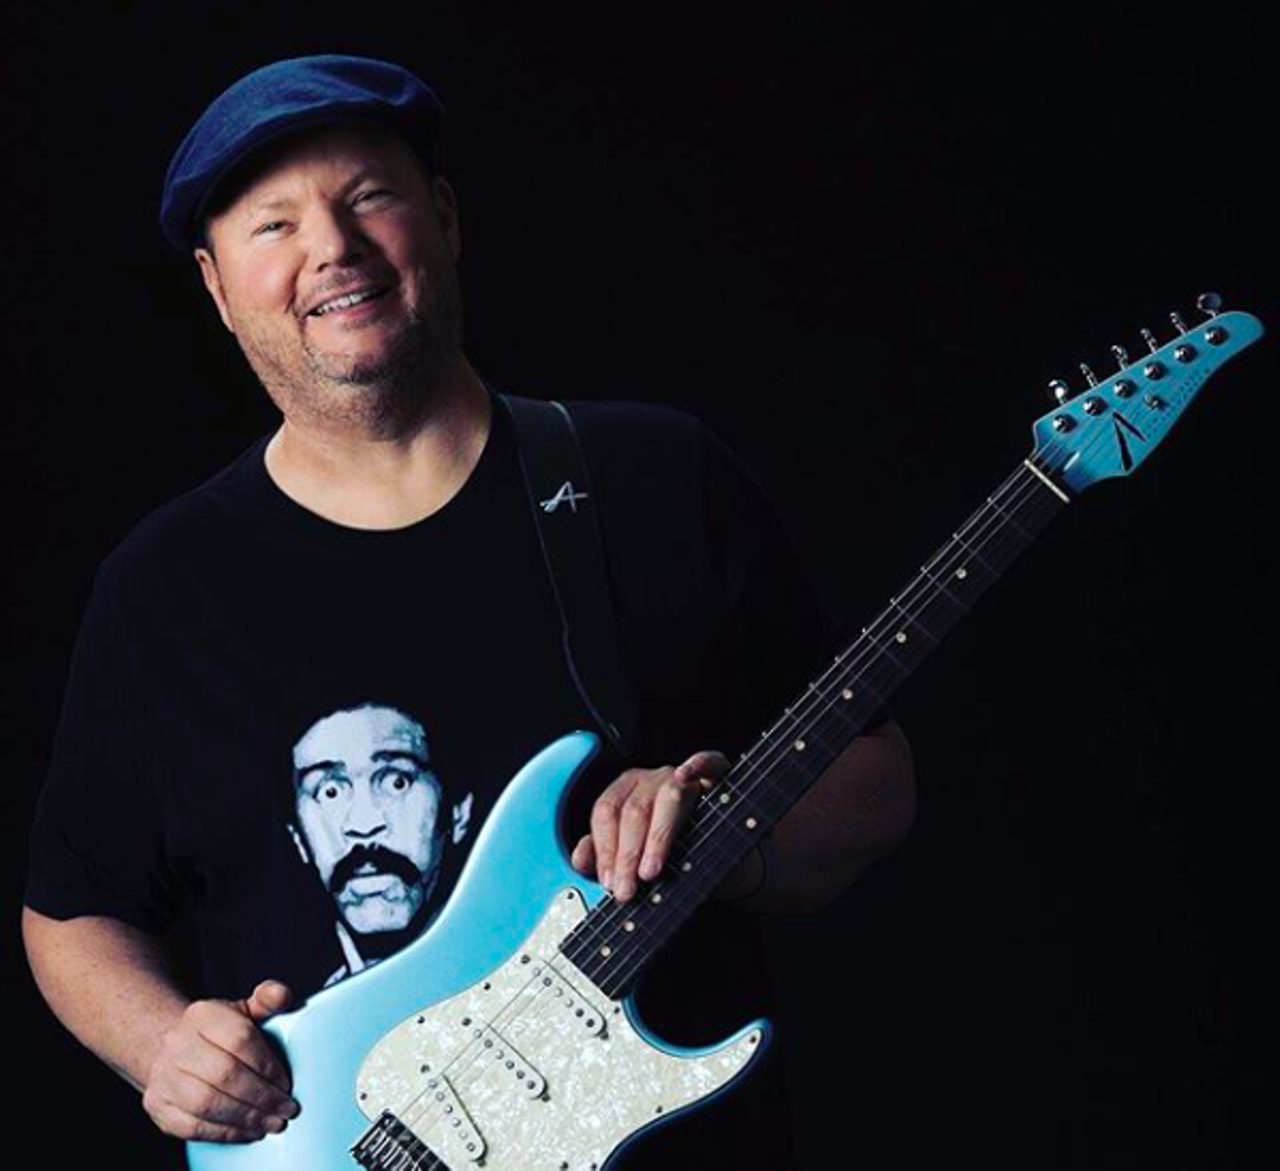 Christopher Cross
Yacht rock singer-songwriter Christopher Cross was born in San Antonio and graduated from Alamo Heights High School. Cross' career didn't survive the MTV era, but his smooth late '70s and early '80s hits including "Sailing" and "Ride Like the Wind" were inescapable on top 40 radio. 
Instagram / ItsMrCross